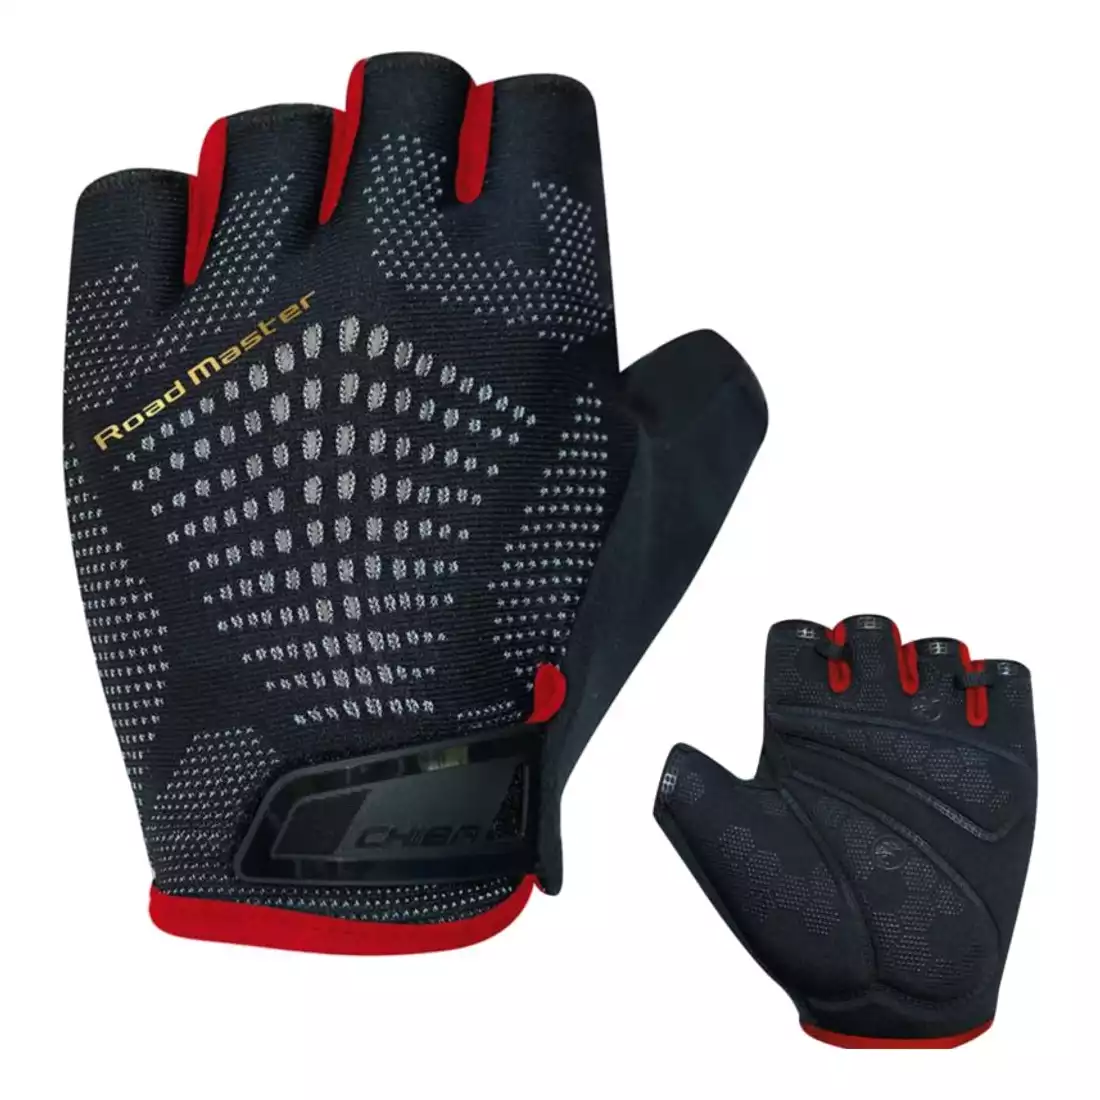 CHIBA ROAD MASTER cycling gloves, black and red